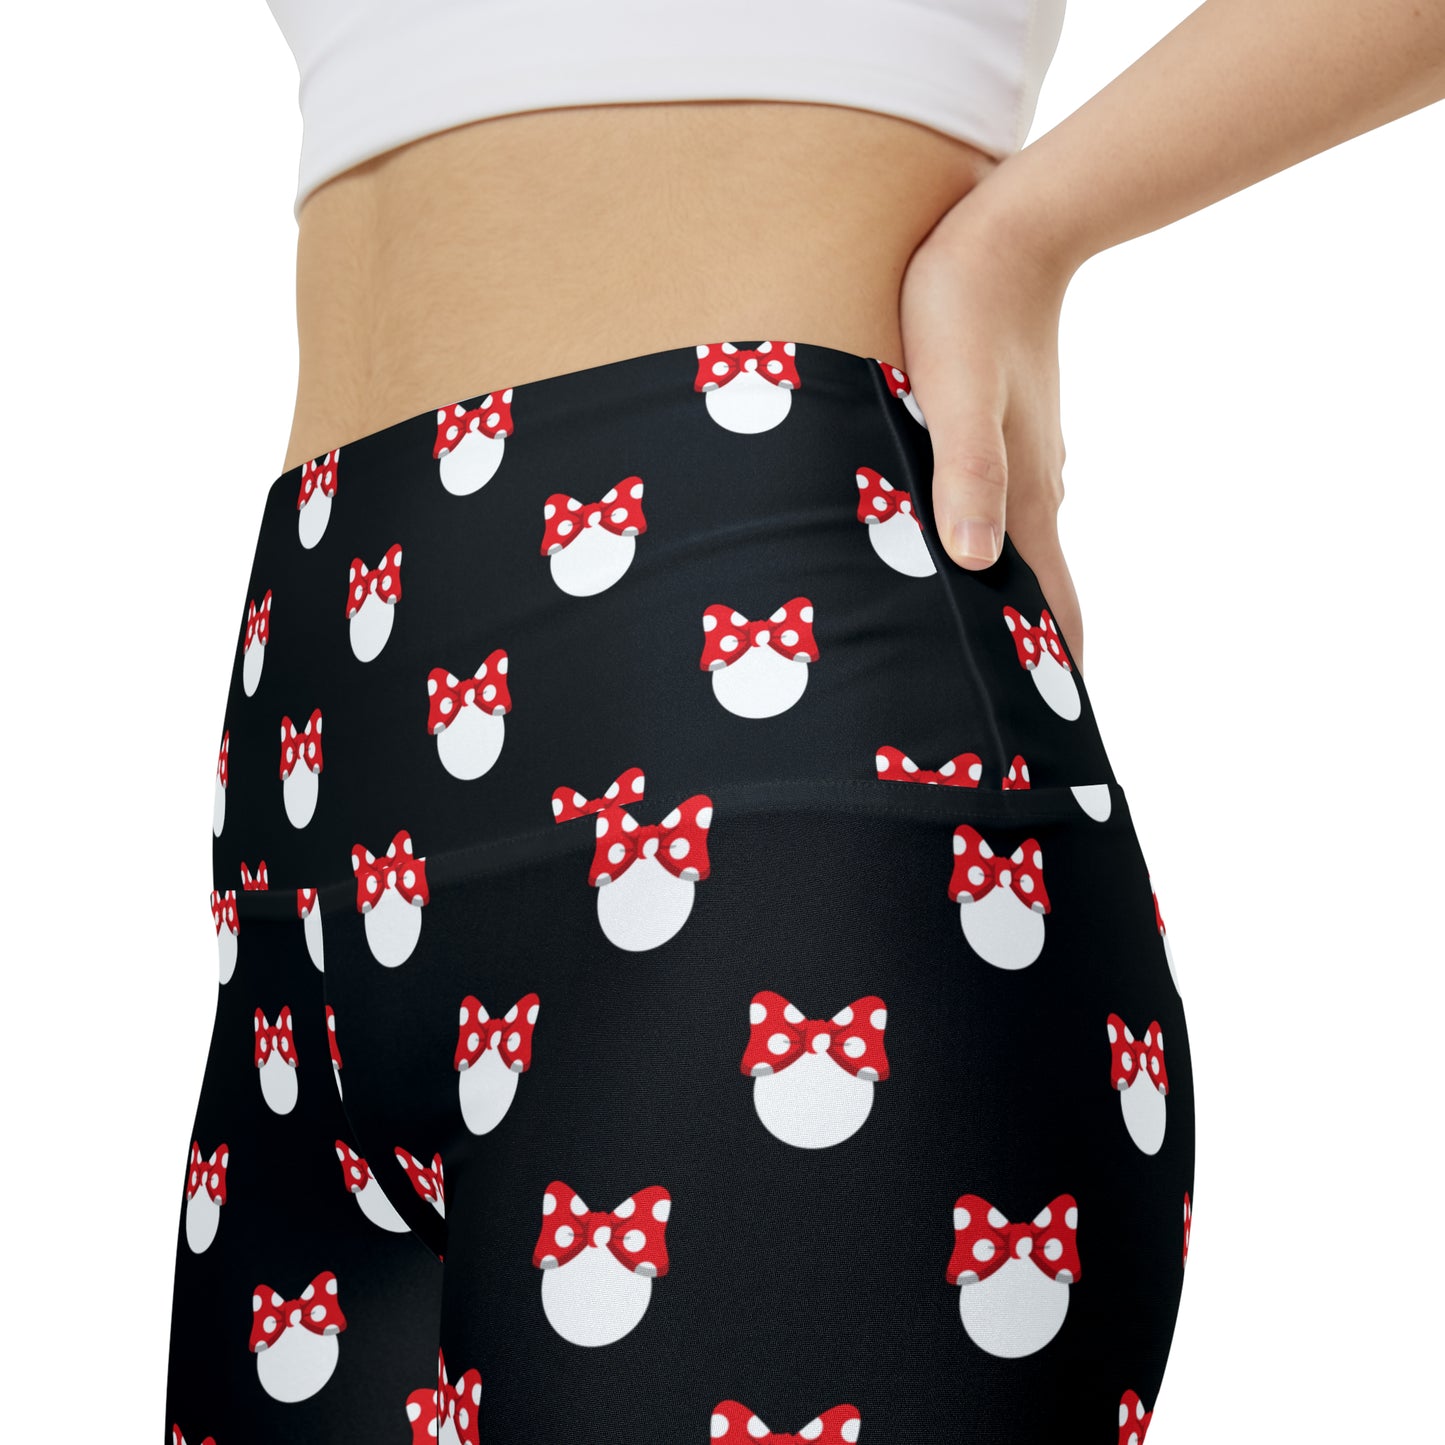 White Polka Dot Red Bow Women's Athletic Workout Shorts